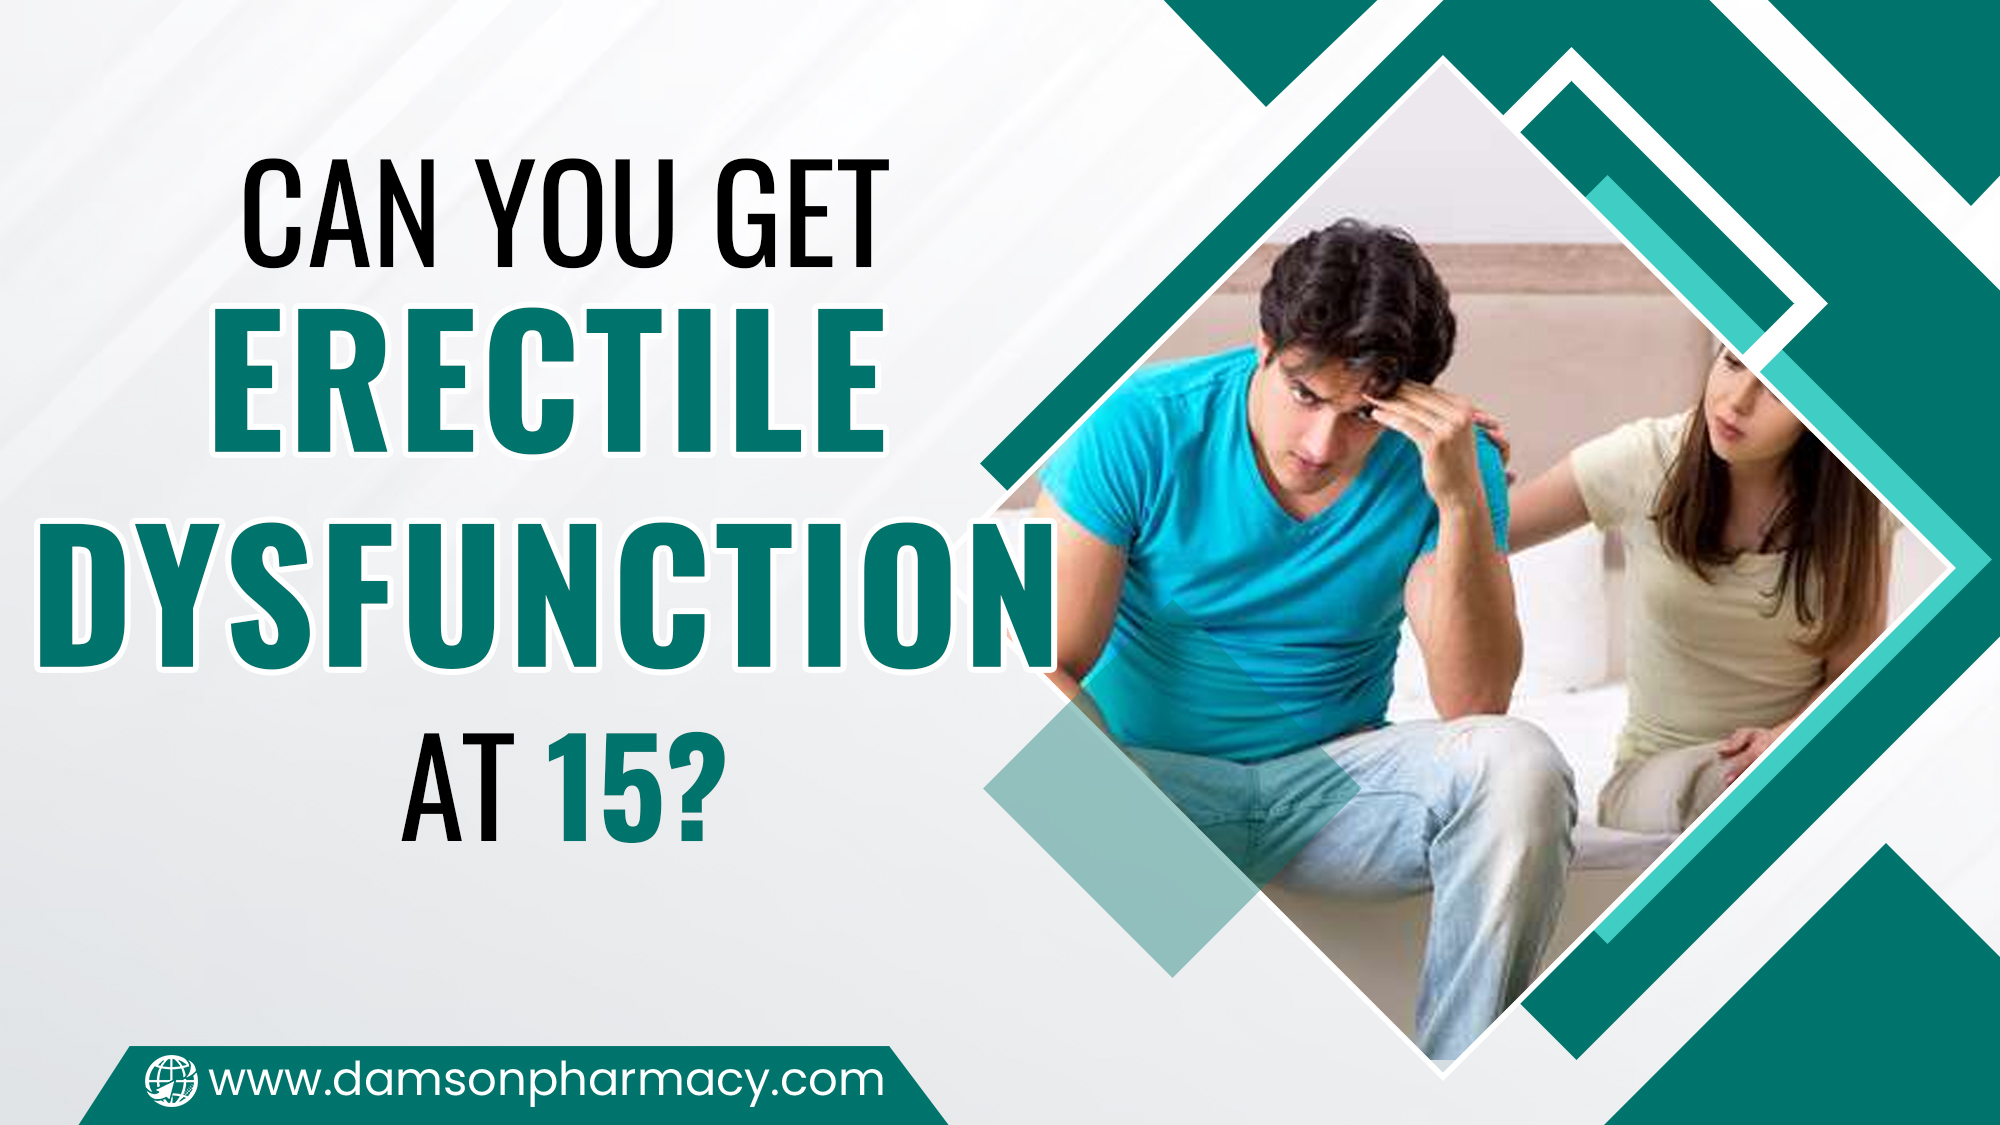 Can You Get Erectile Dysfunction at 15? - Damson Pharmacy